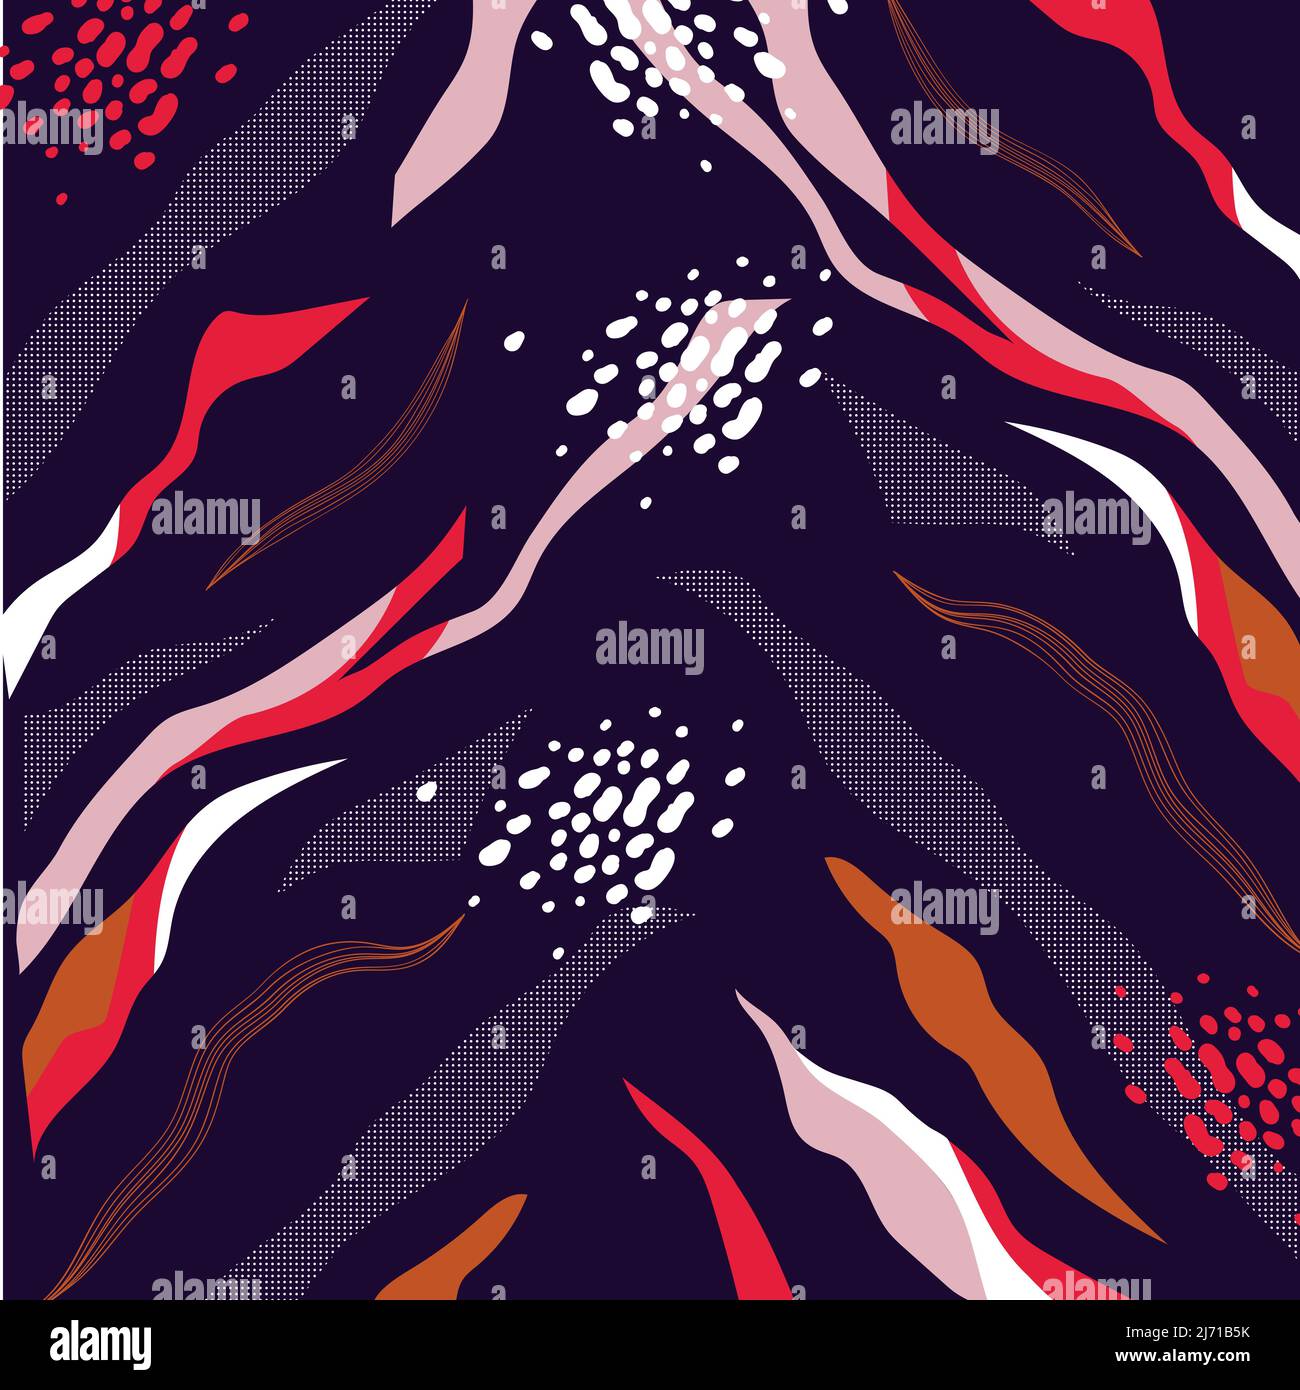 Abstract Colorful Wavy Pattern Stock Vector